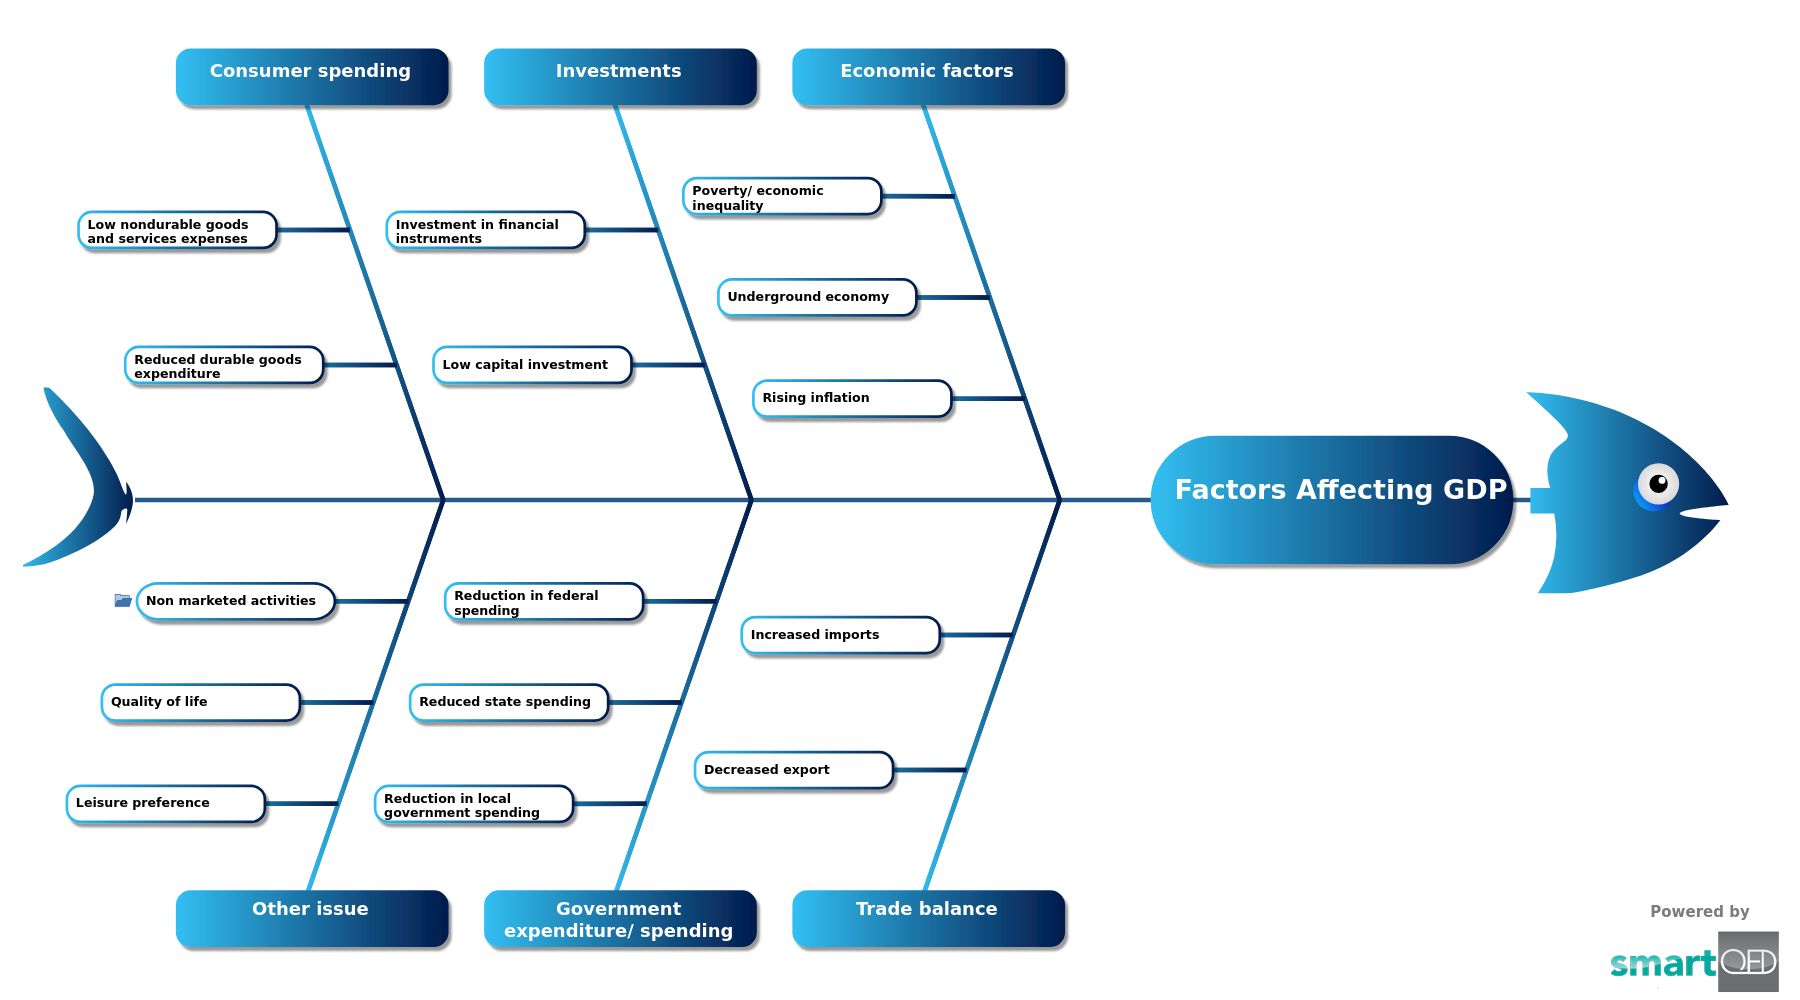 Fishbone template on factors affecting GDP